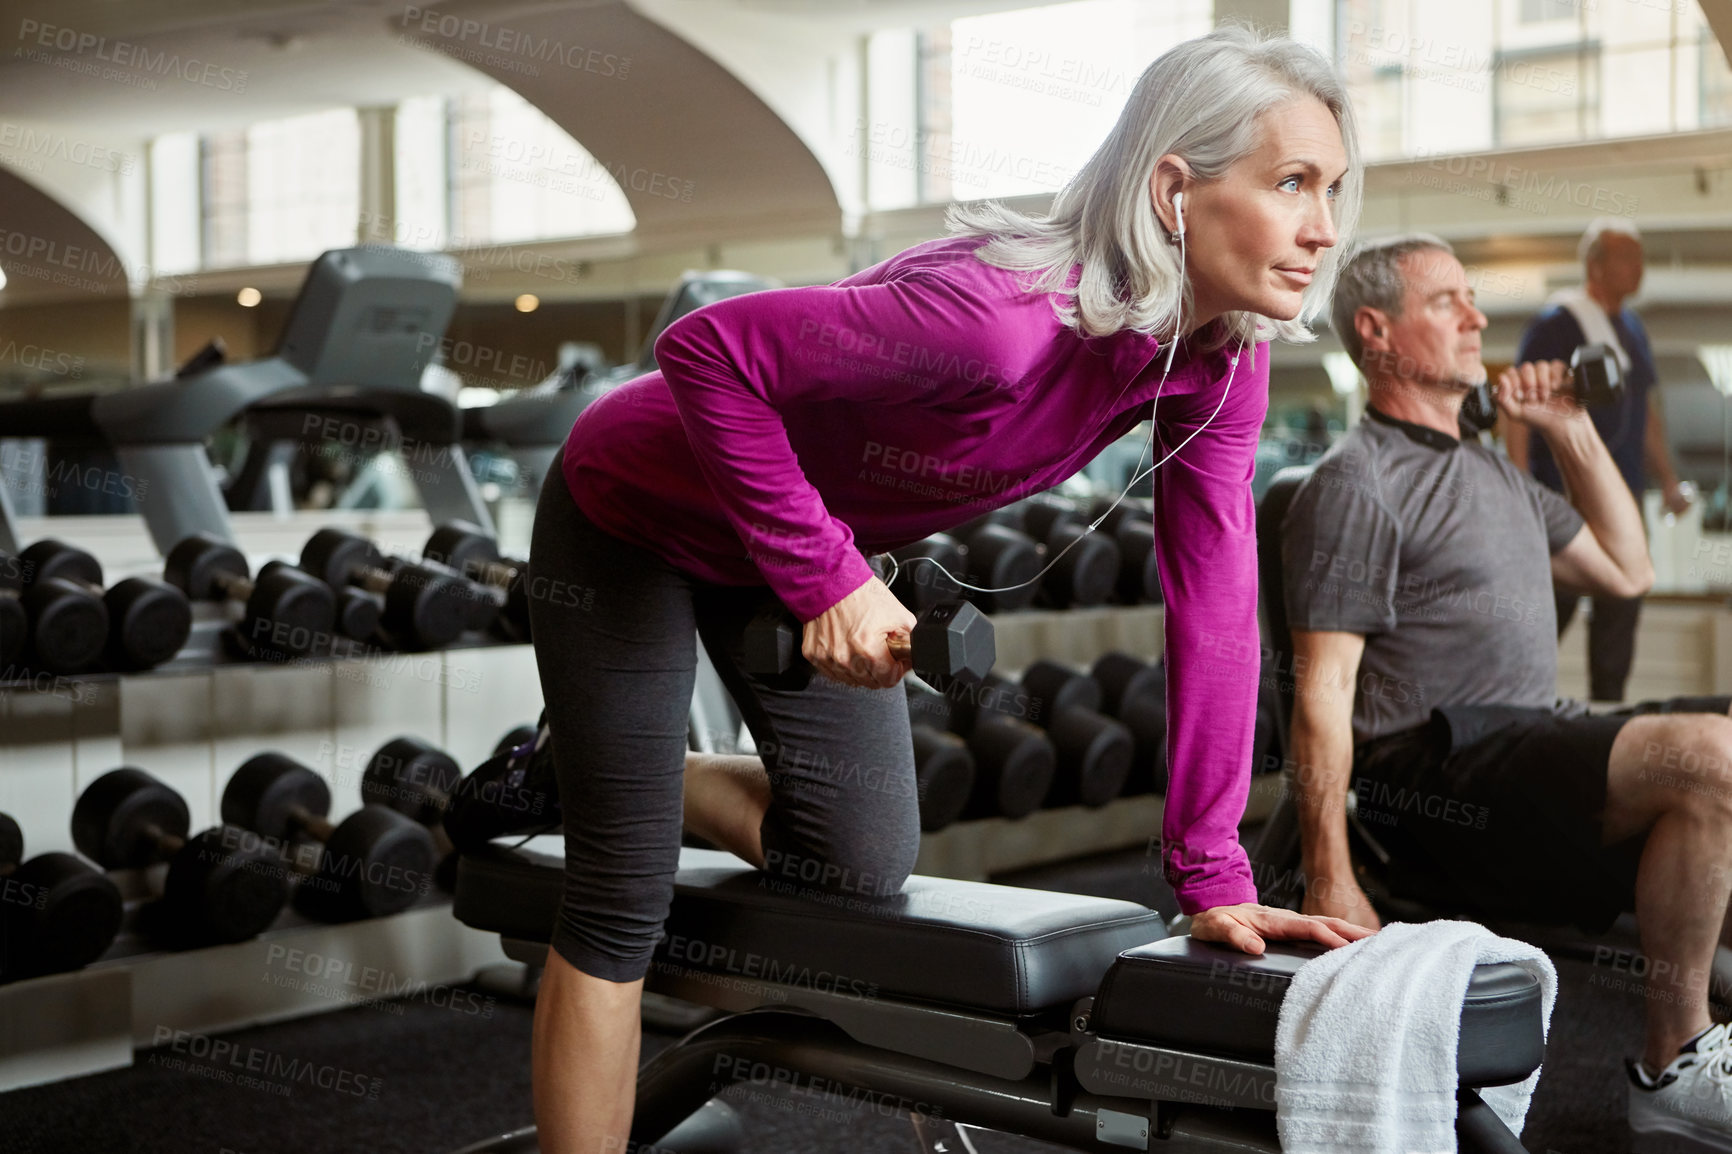 Buy stock photo Shot of a senior group of people working out together at the gym